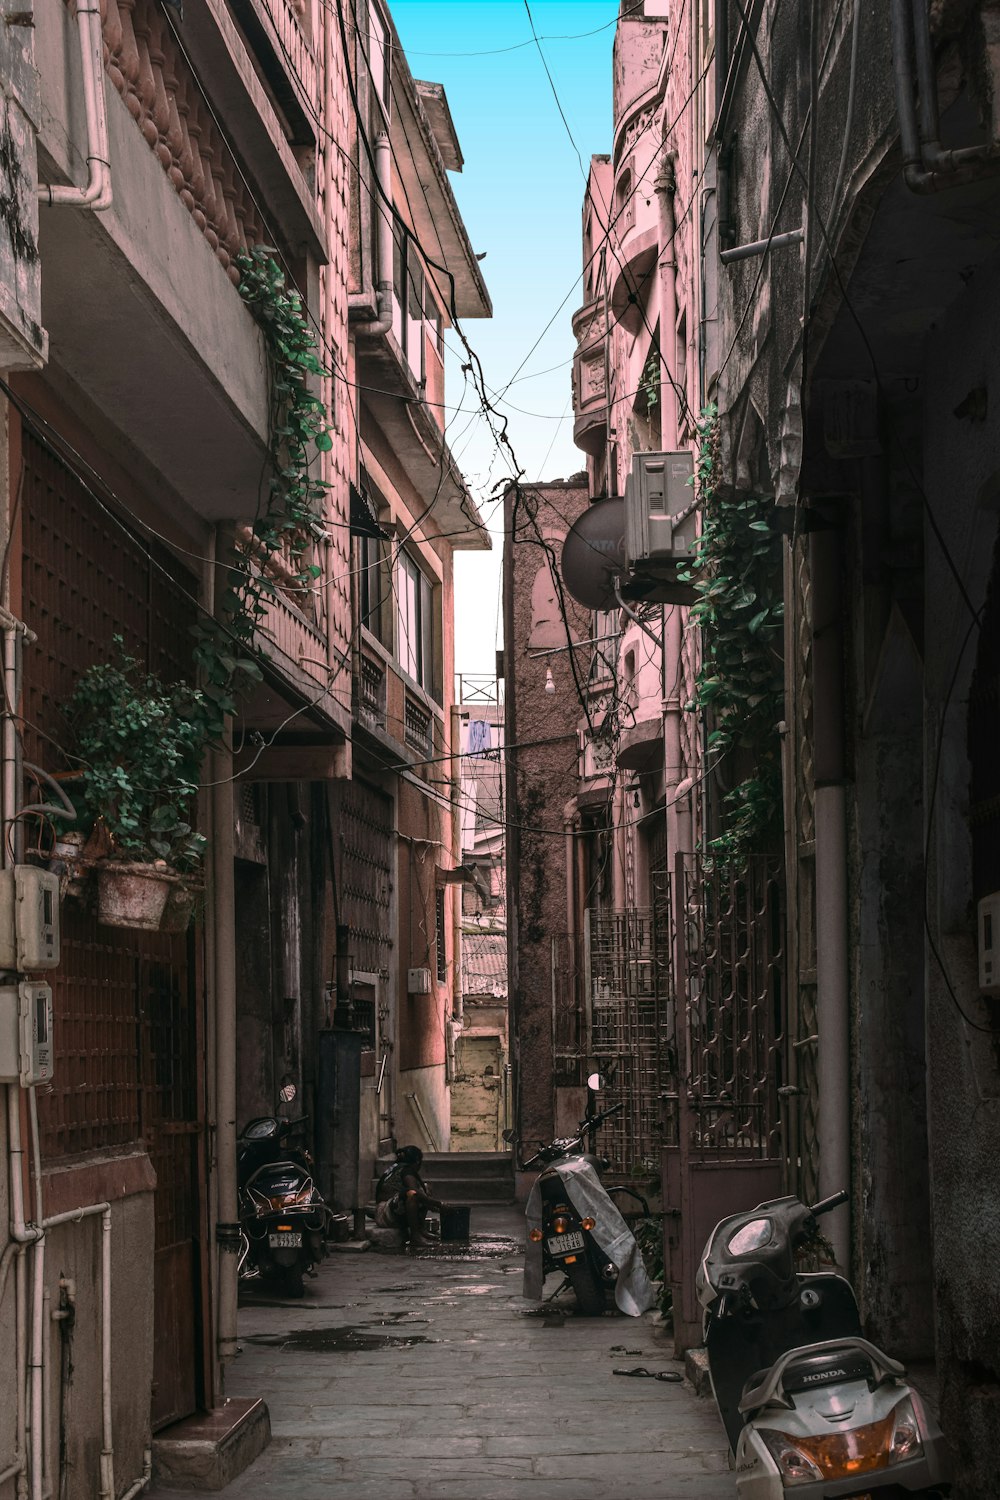 a narrow alley with scooters parked on both sides